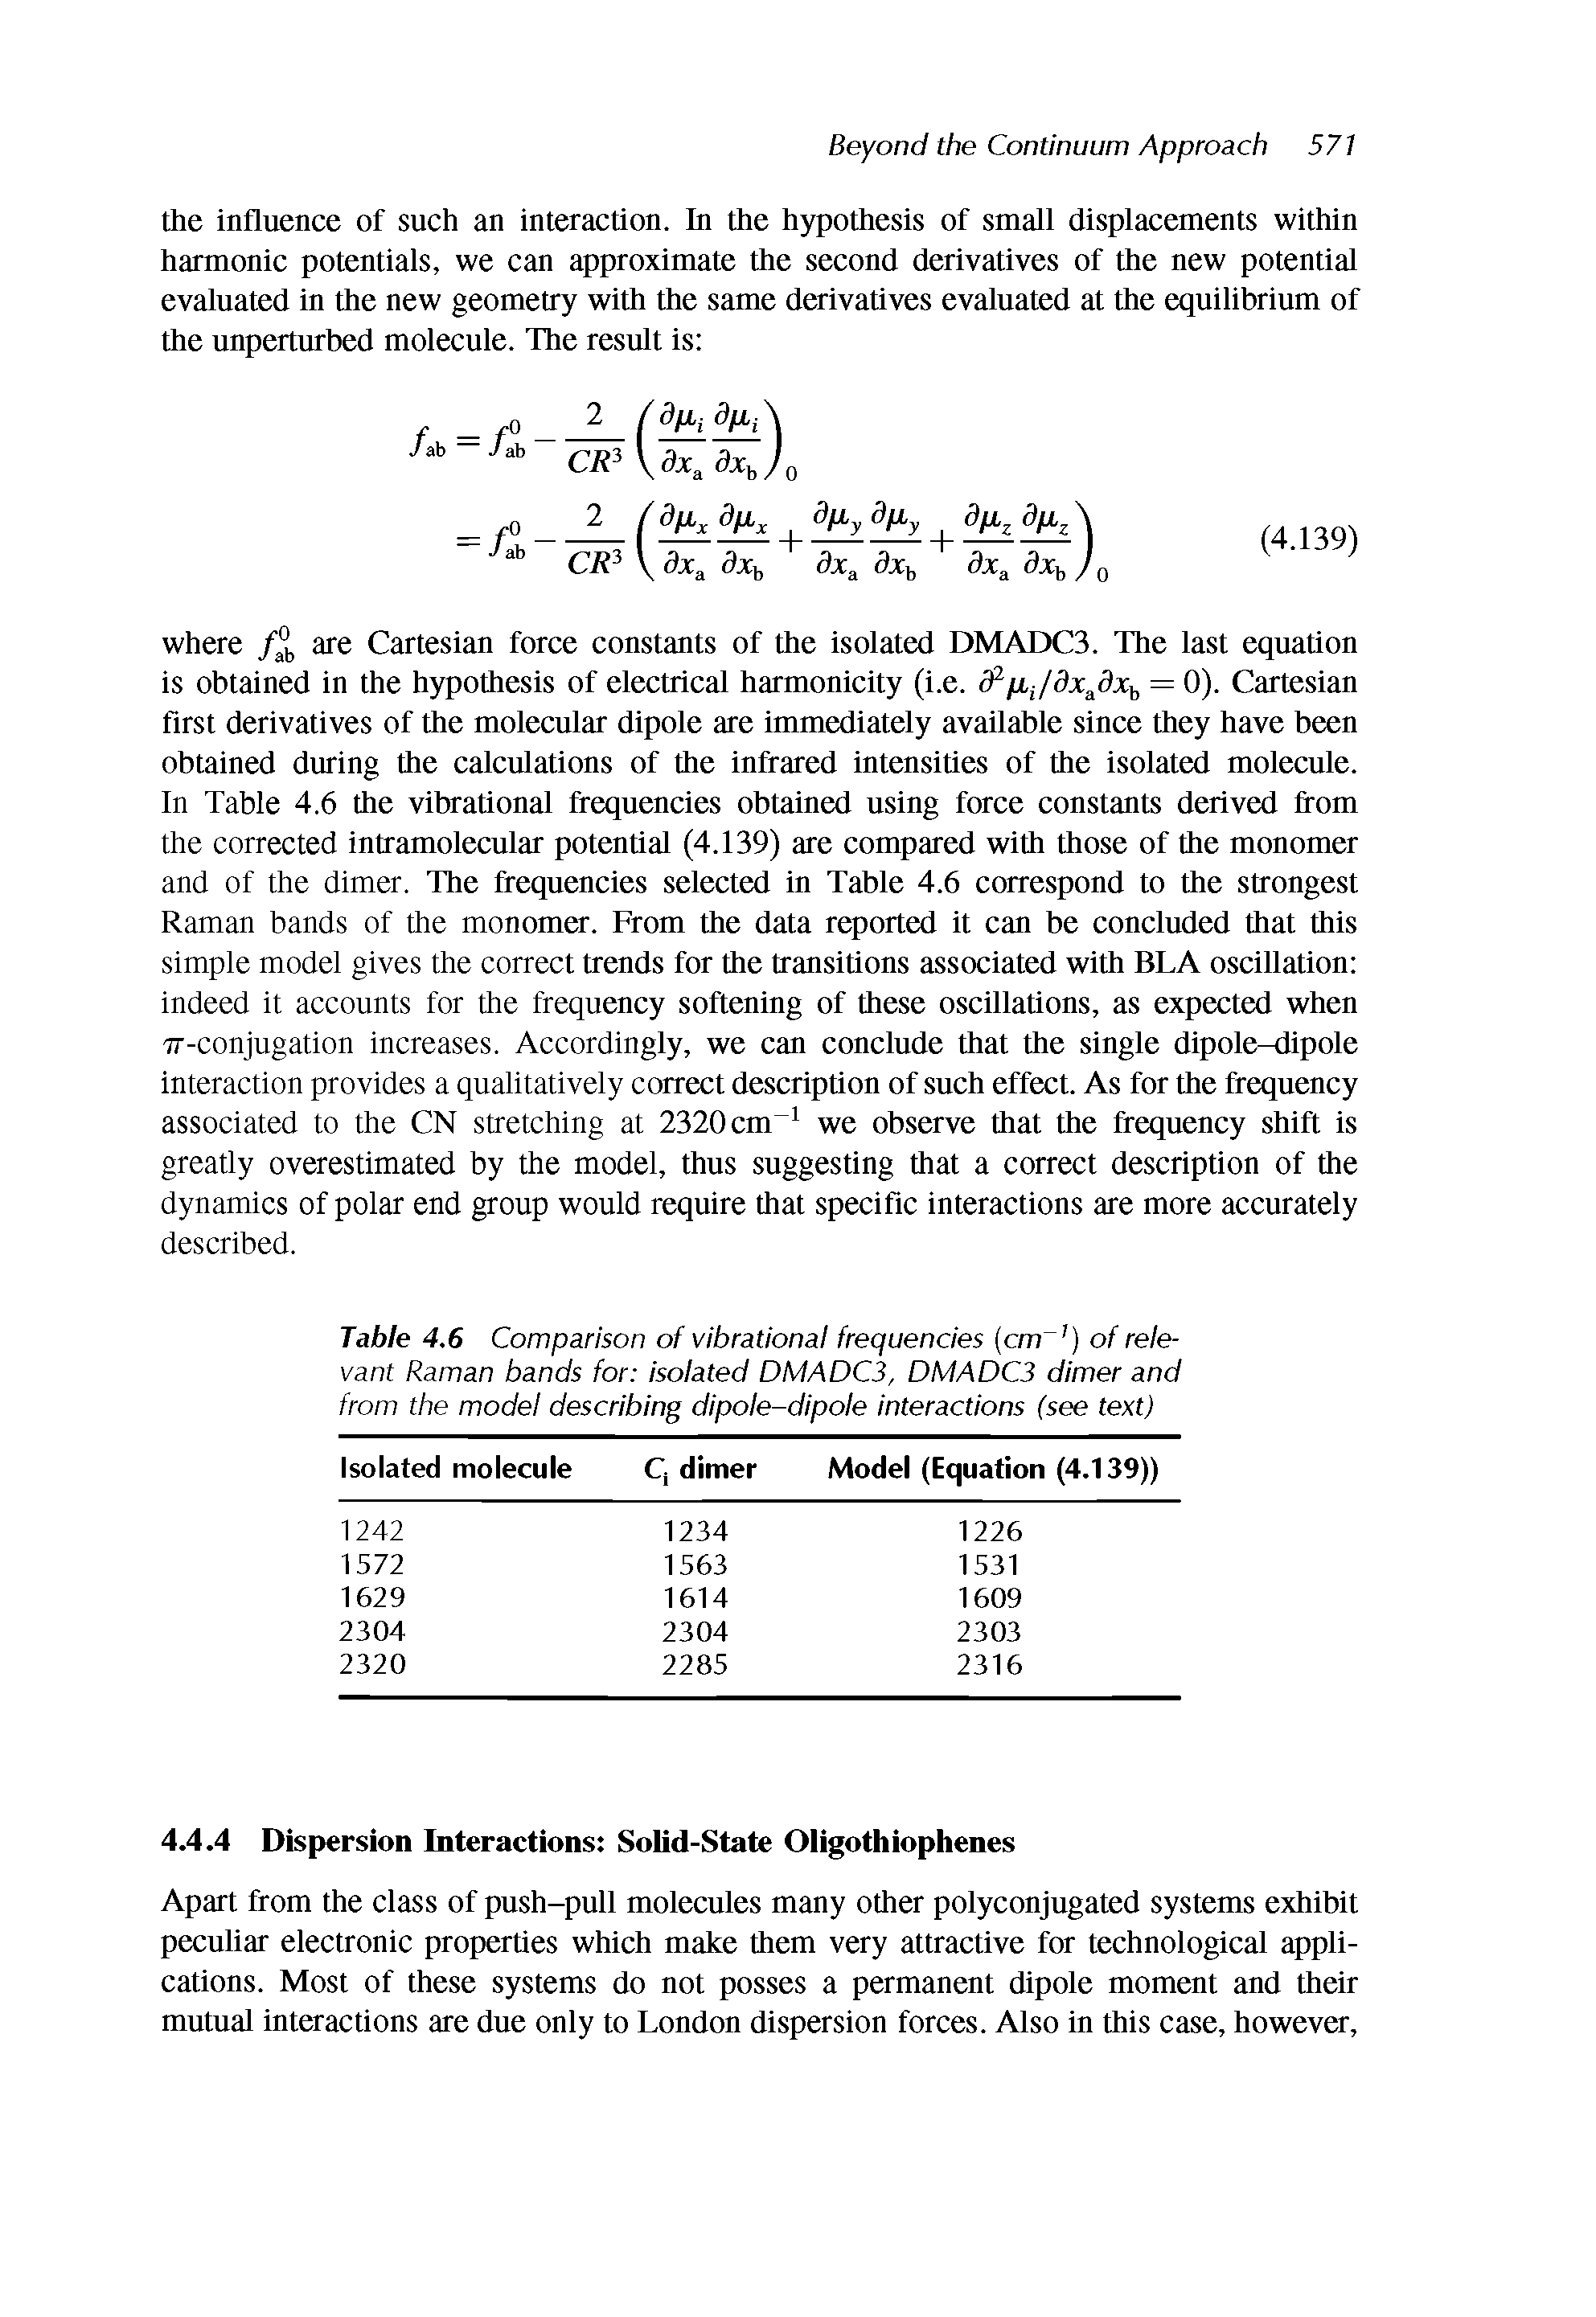 Table 4.6 Comparison of vibrational frequencies (cm ]) of relevant Raman bands for isolated DMADC3, DMADC3 dimer and from the model describing dipole-dipole interactions (see text)...